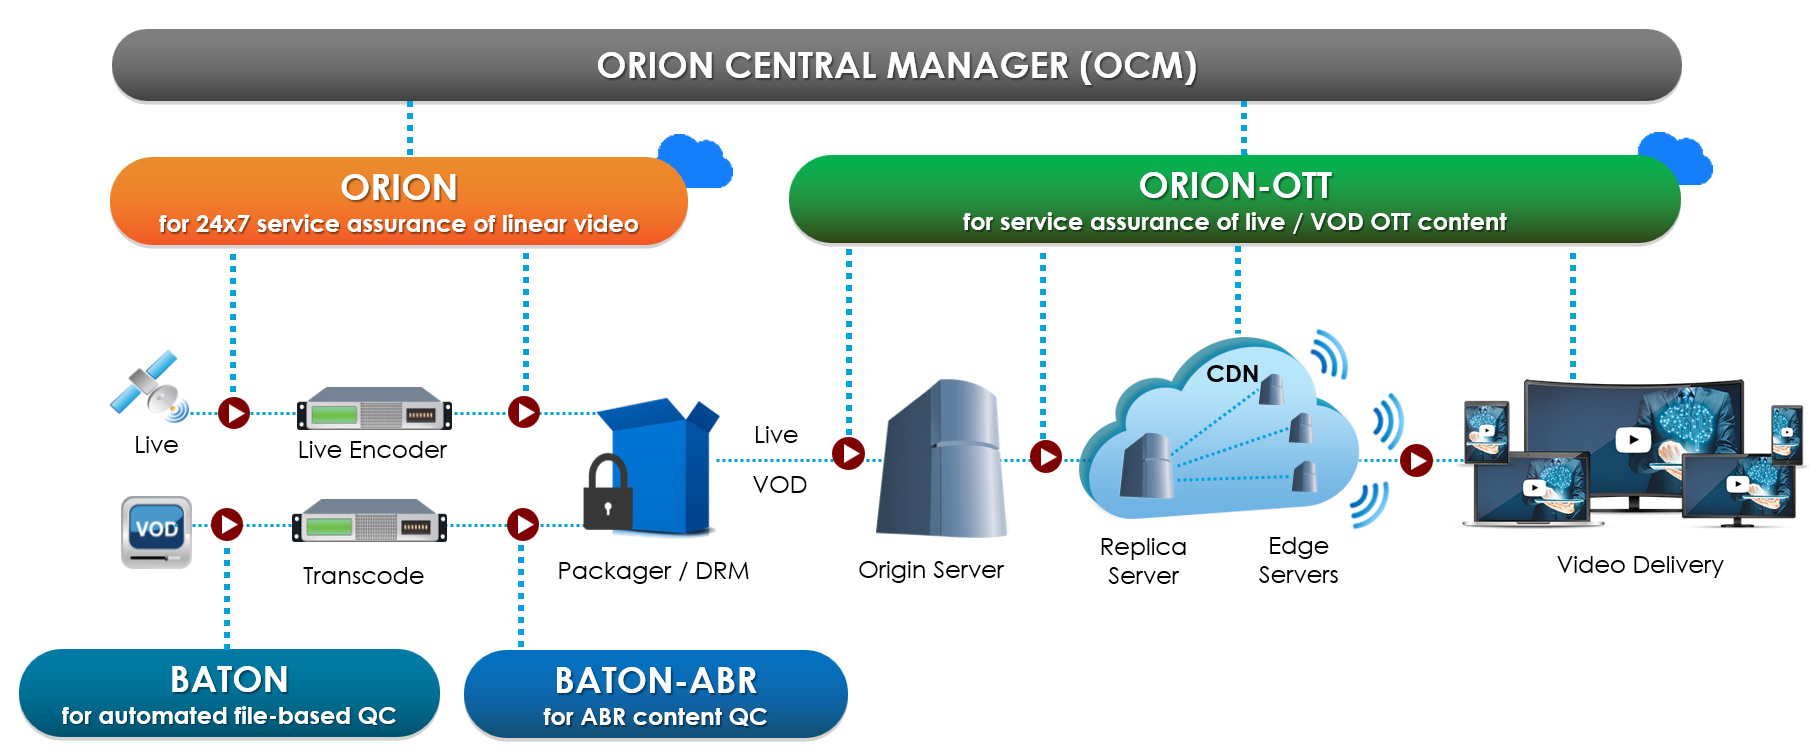 Orion Central Manager